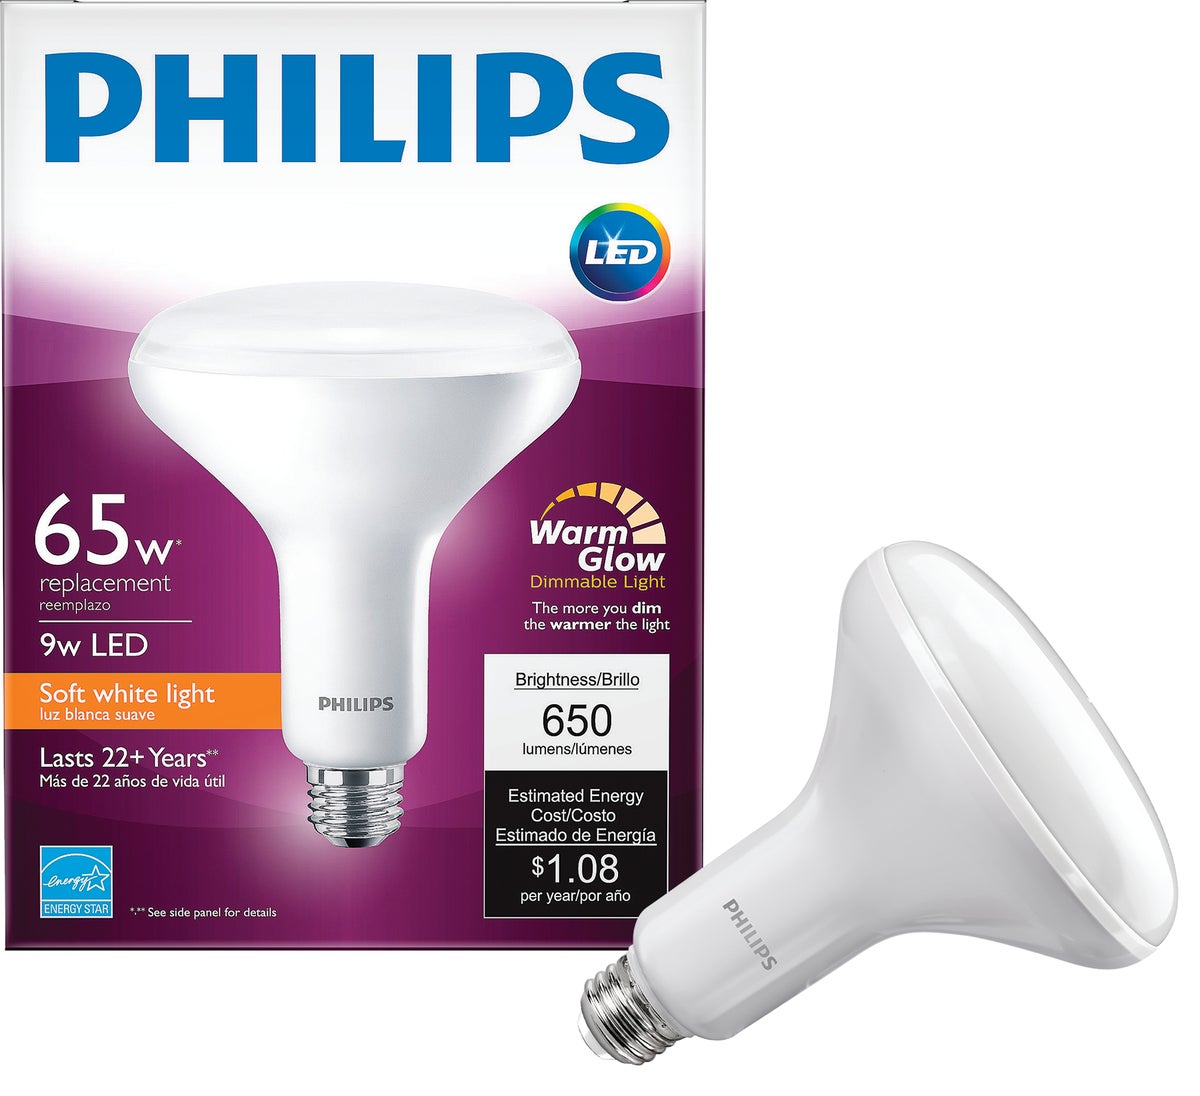 Philips 65W Replacement BR30 Floodlight LED with Warm Glow Dimming